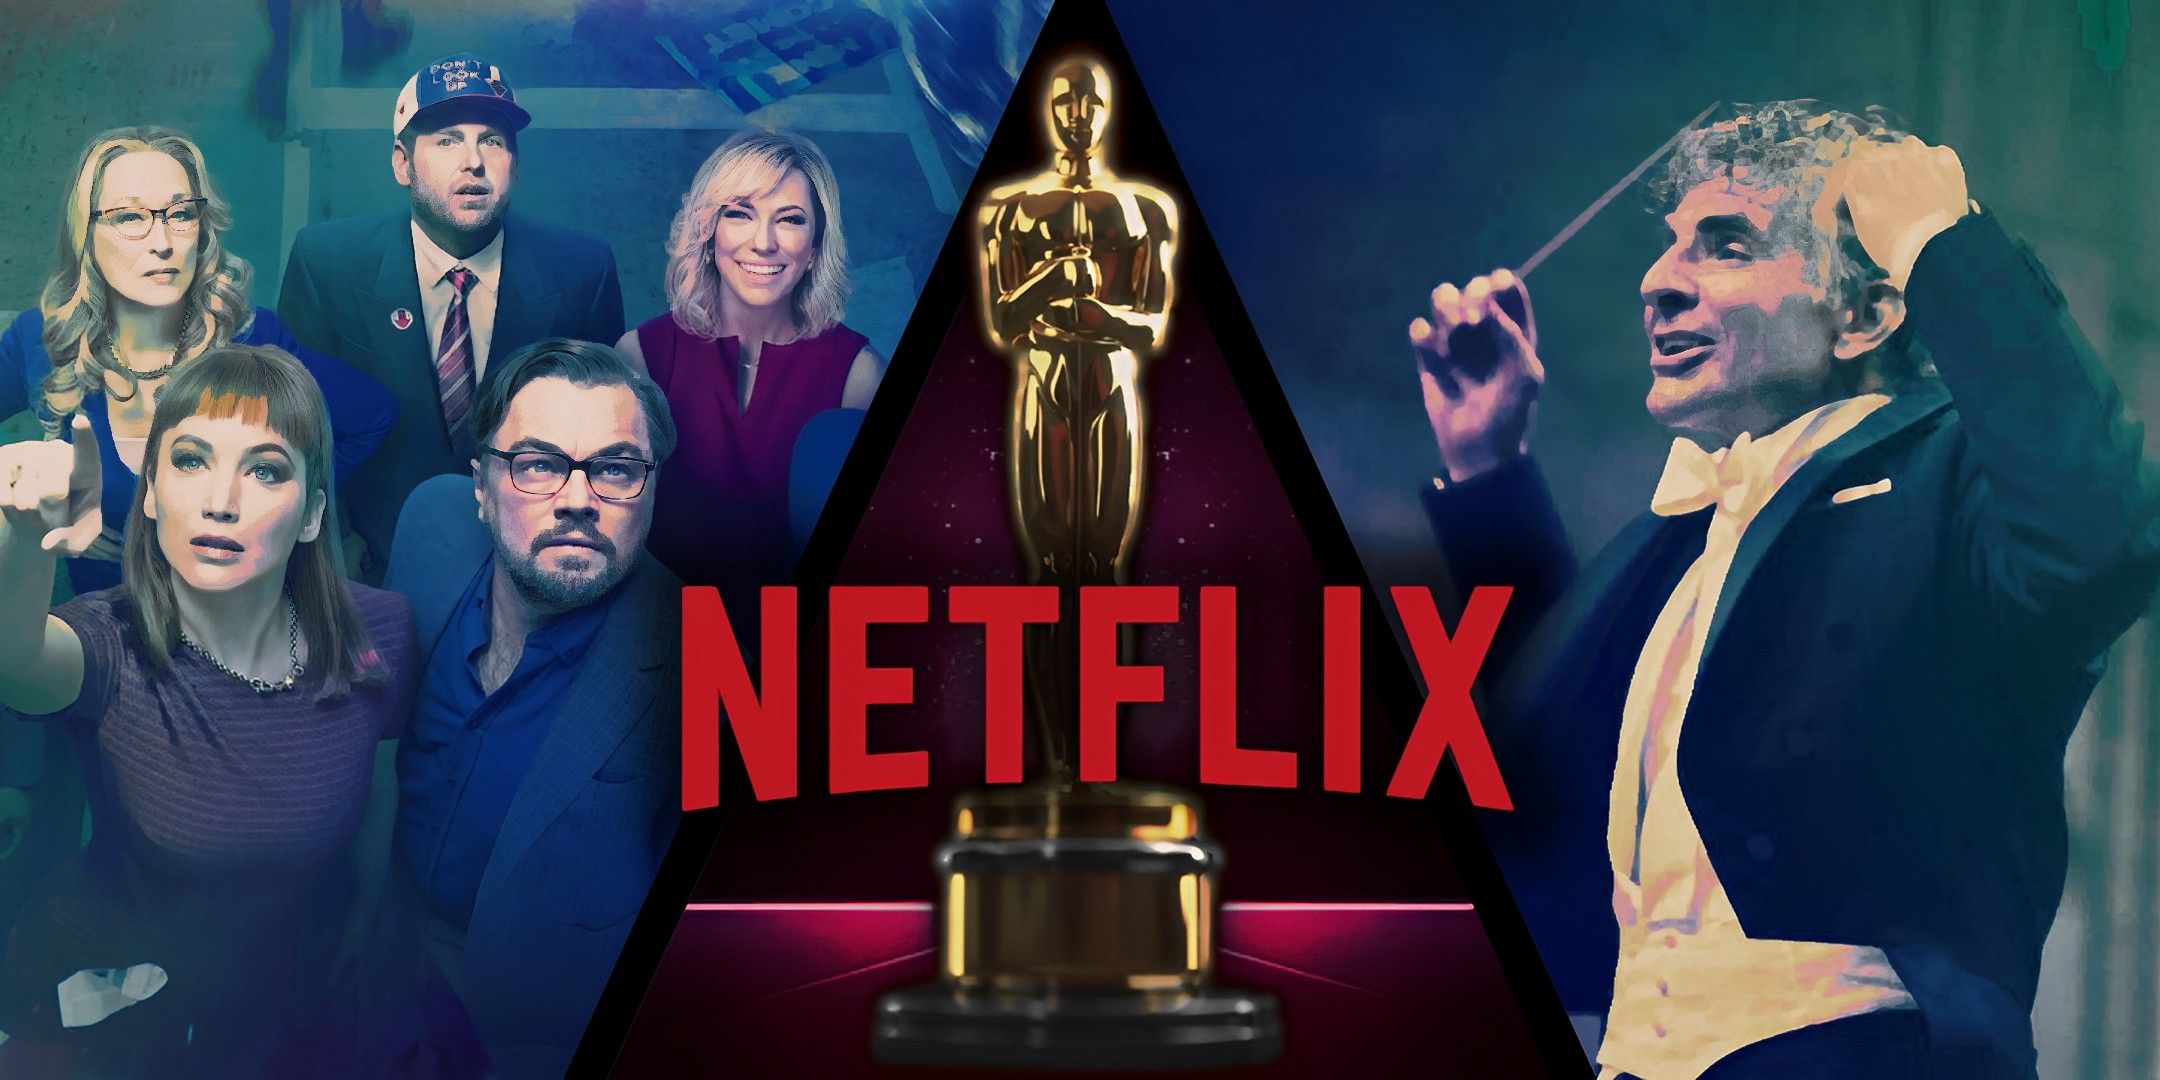 Every Netflix Original Movie Nominated for Best Picture, Ranked